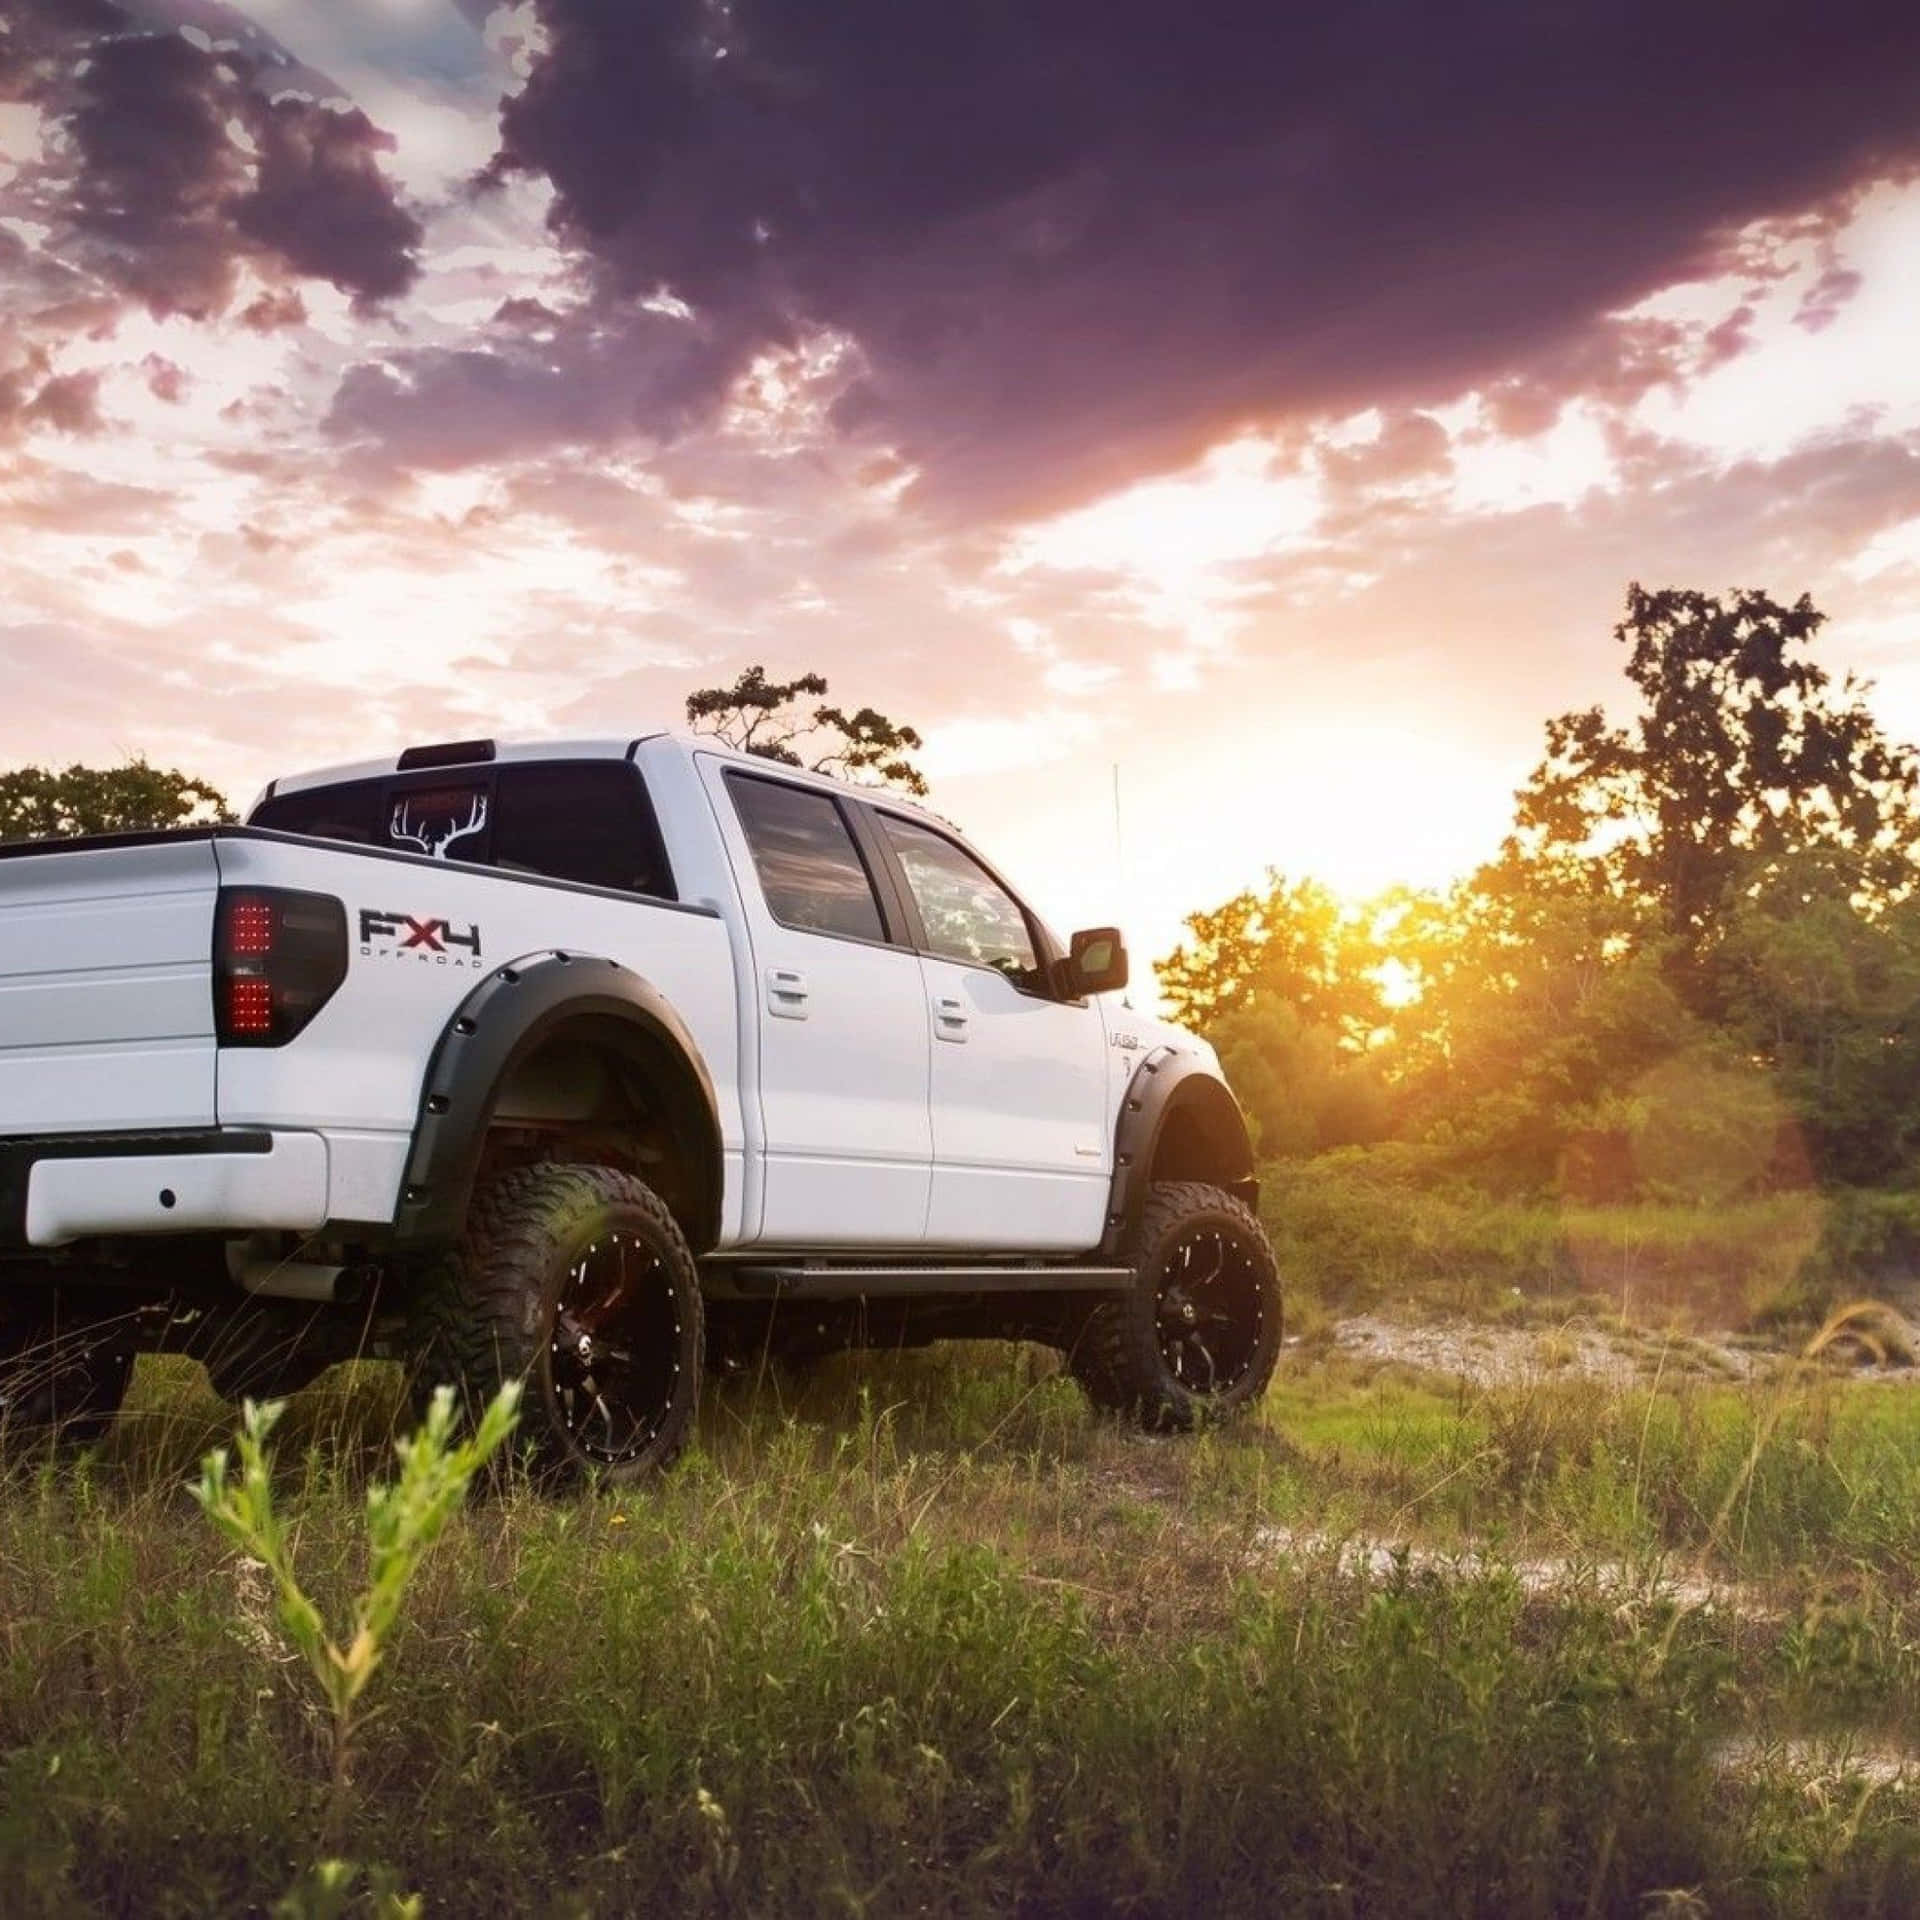 White Lifted Truck At Sunset Wallpaper